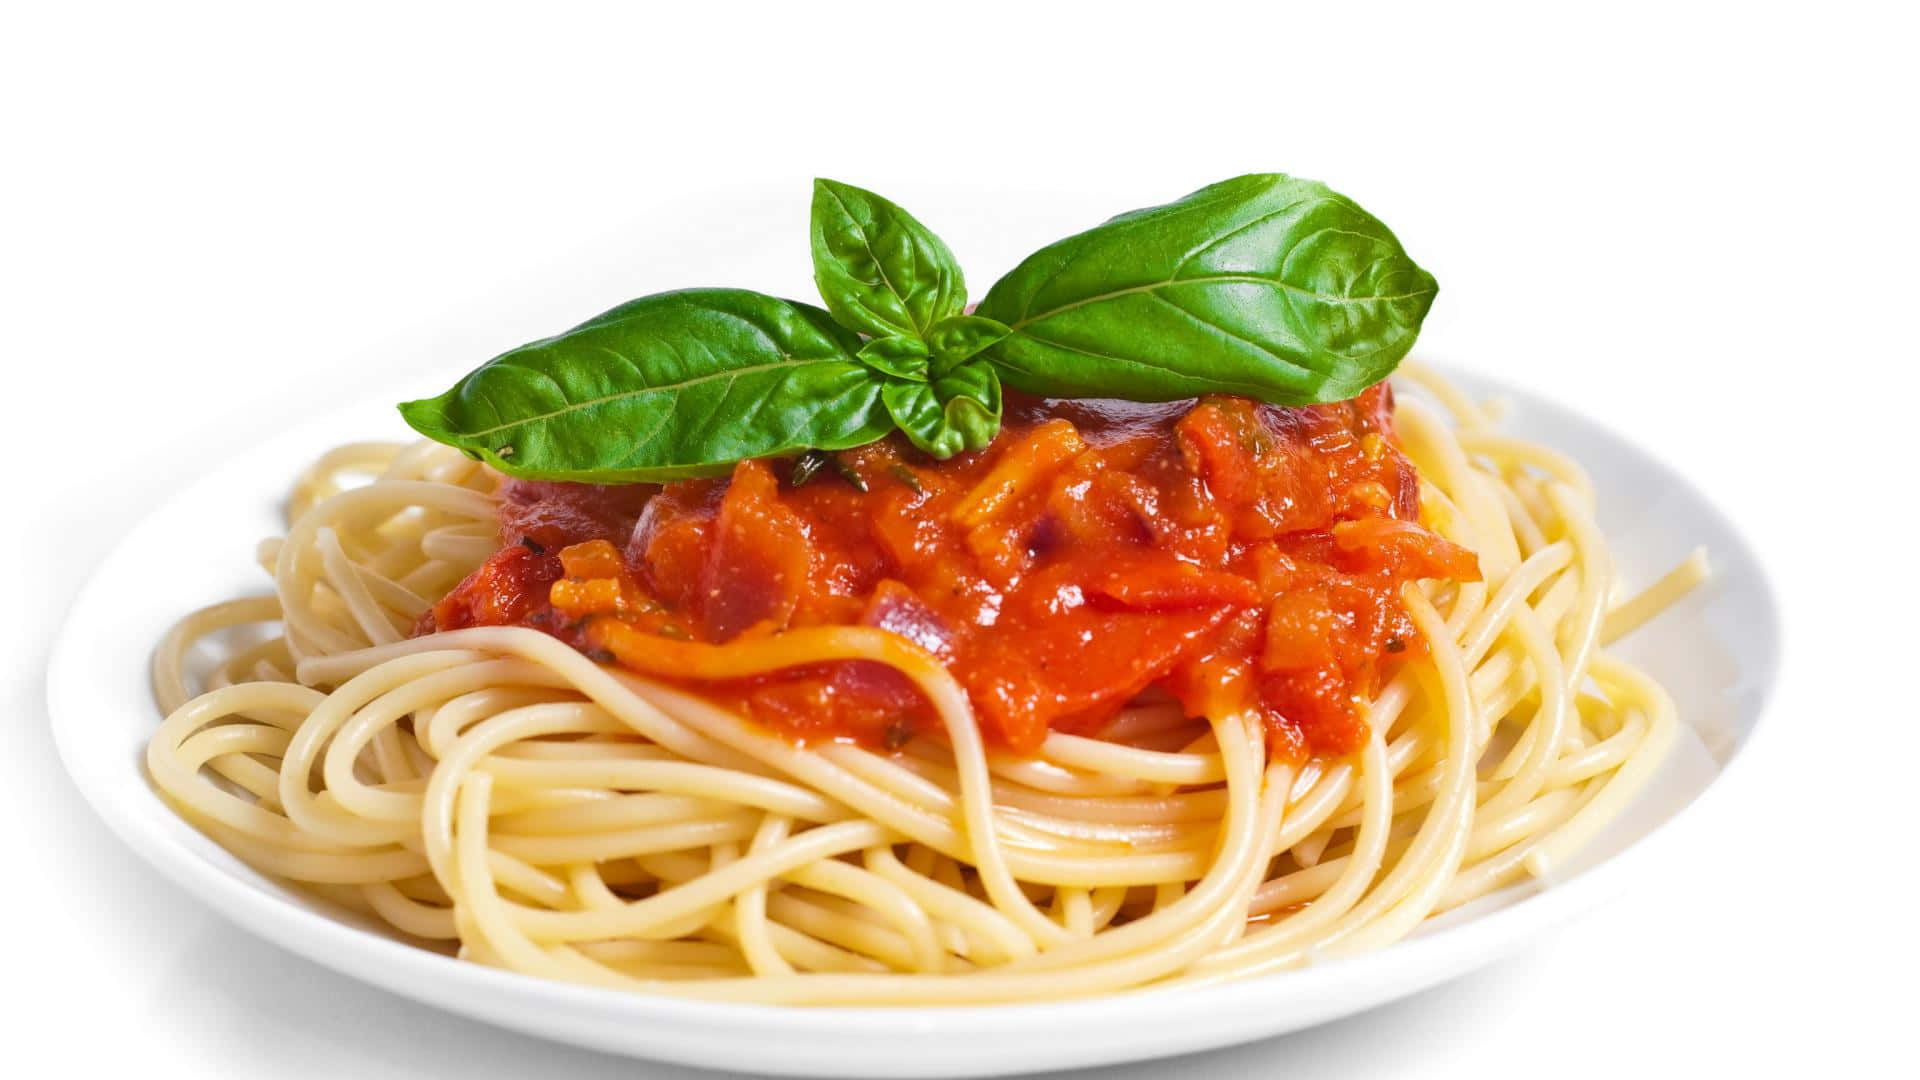 A Plate Of Spaghetti With Tomato Sauce And Basil